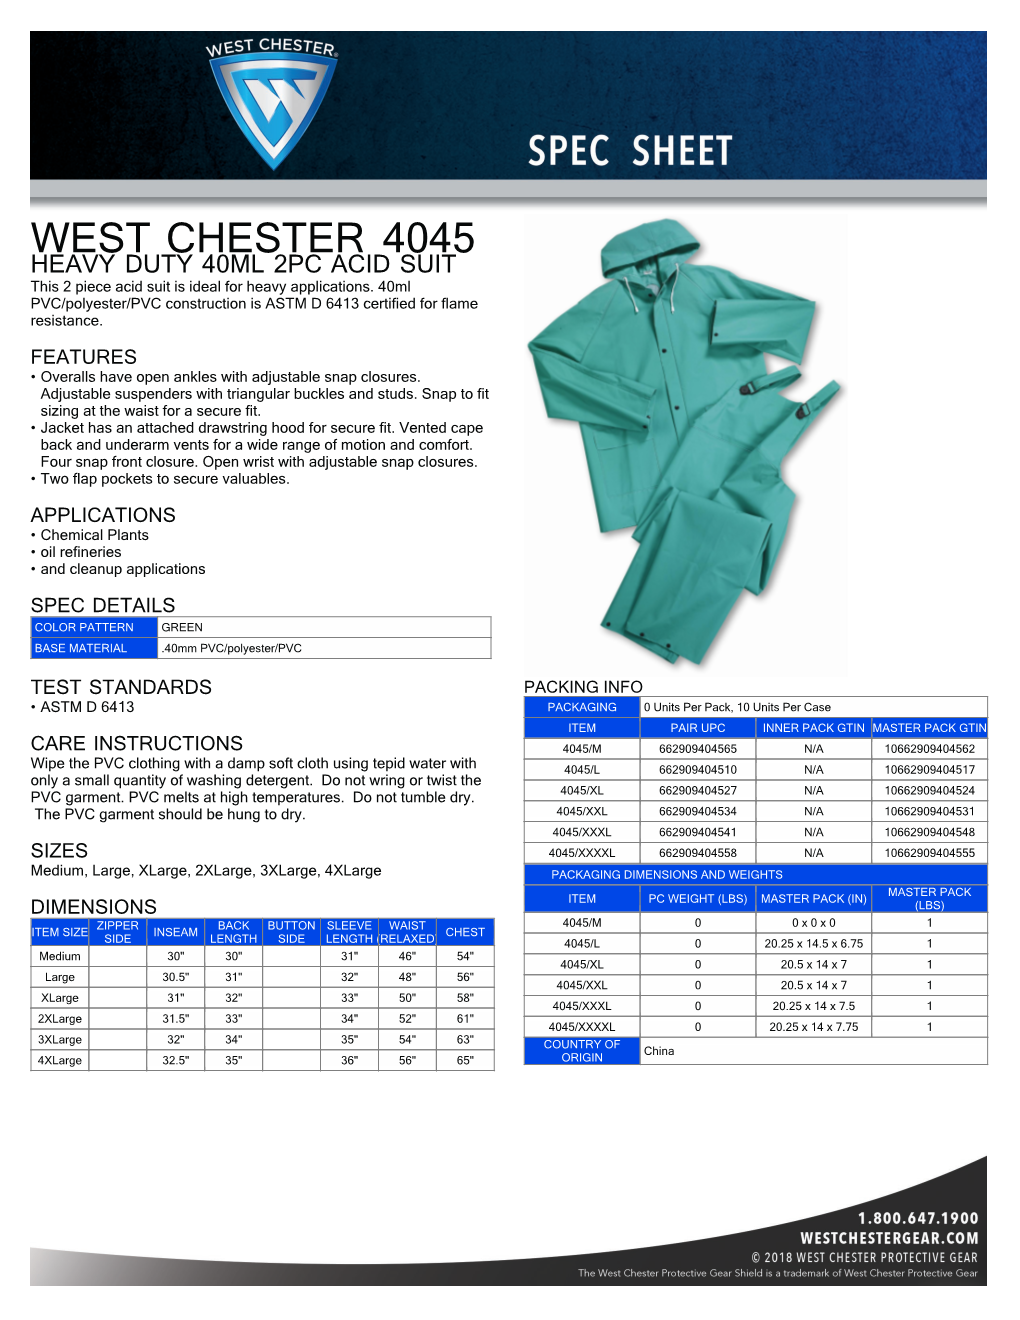 WEST CHESTER 4045 HEAVY DUTY 40ML 2PC ACID SUIT This 2 Piece Acid Suit Is Ideal for Heavy Applications